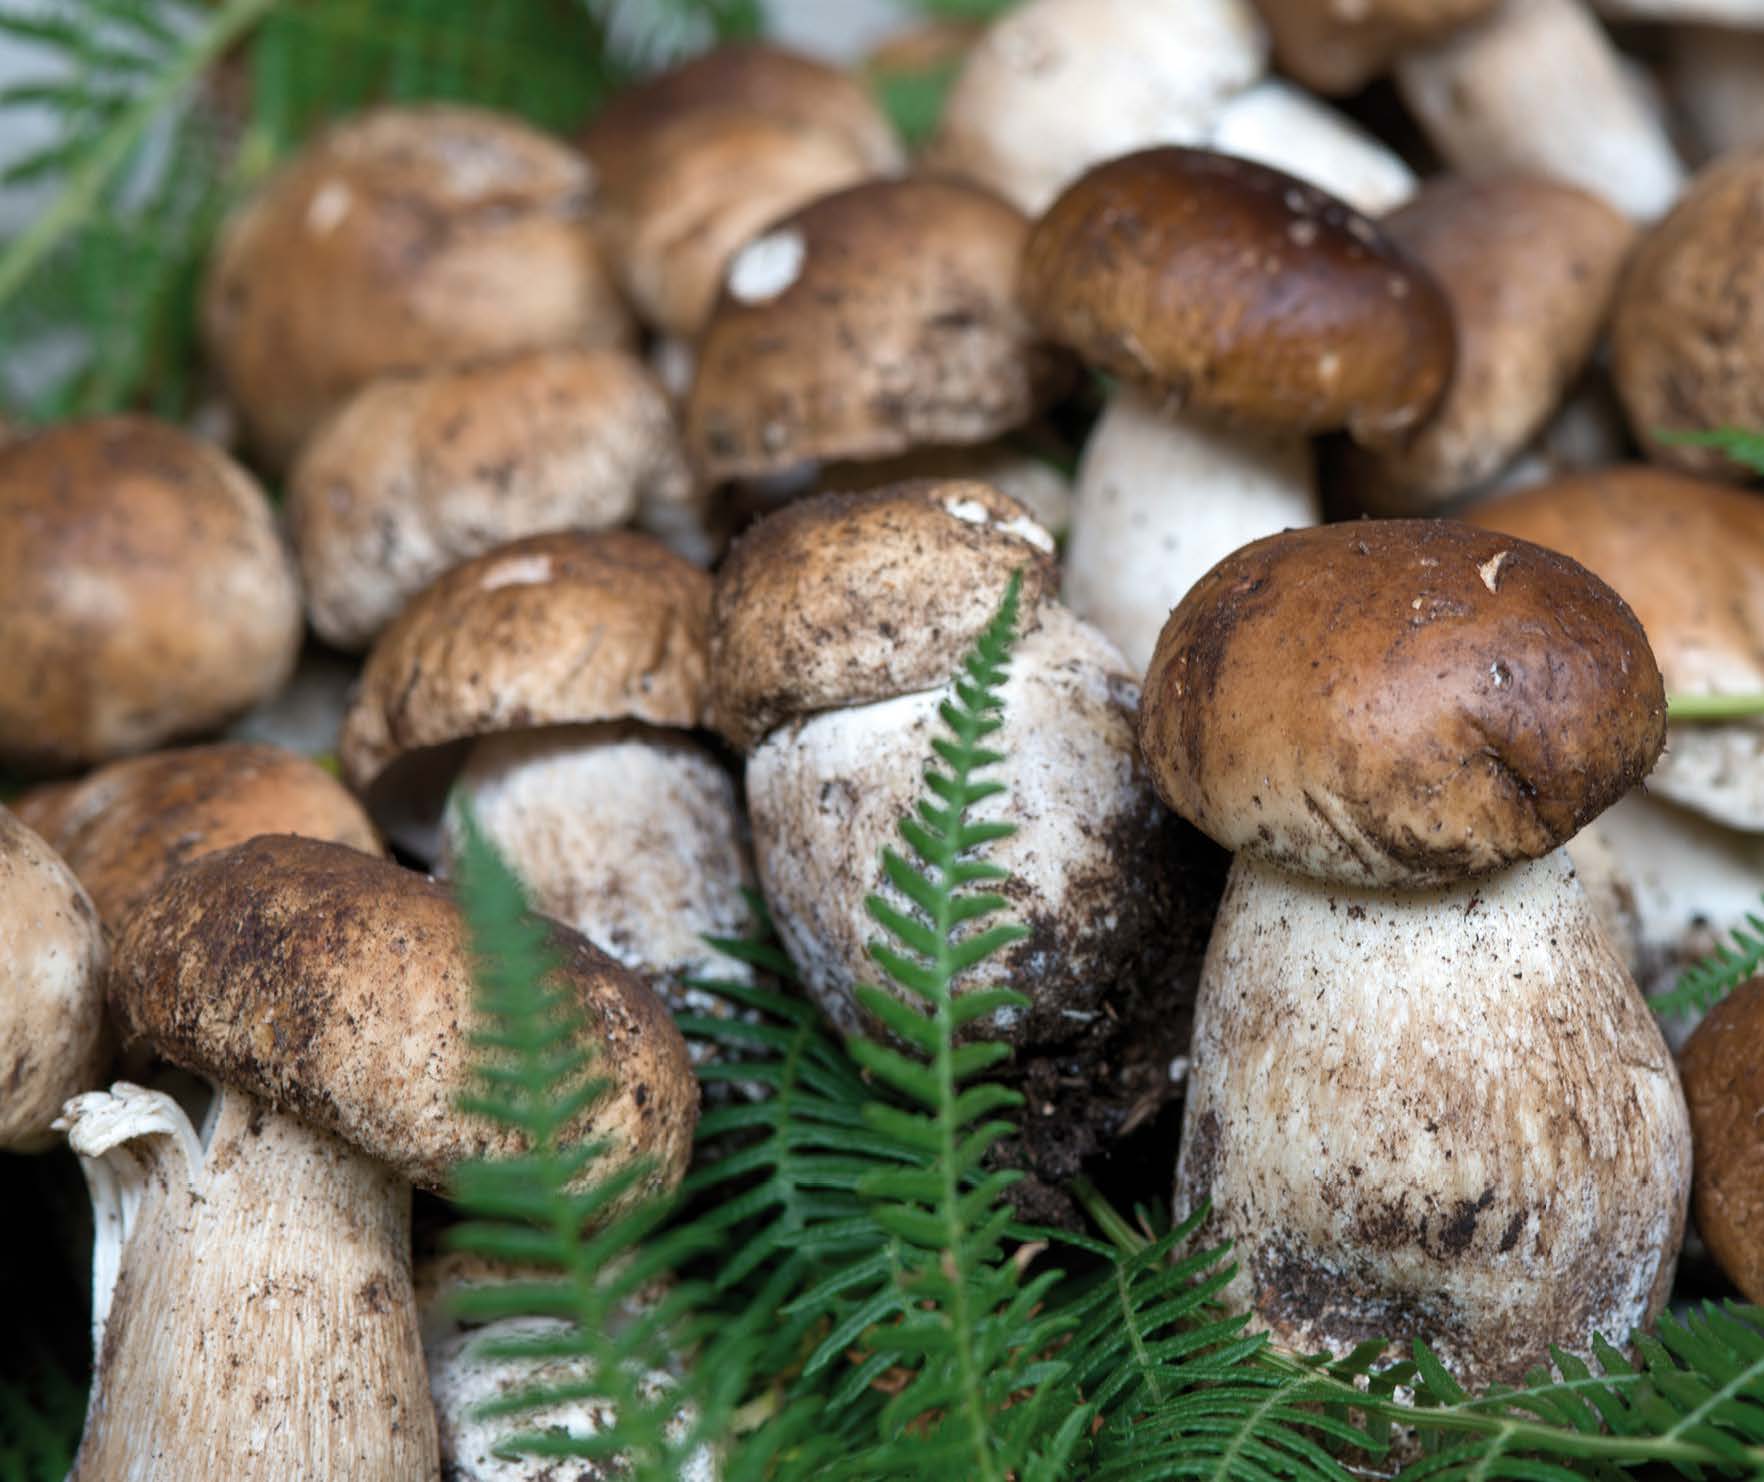 Are we all mushroom "foragers"?